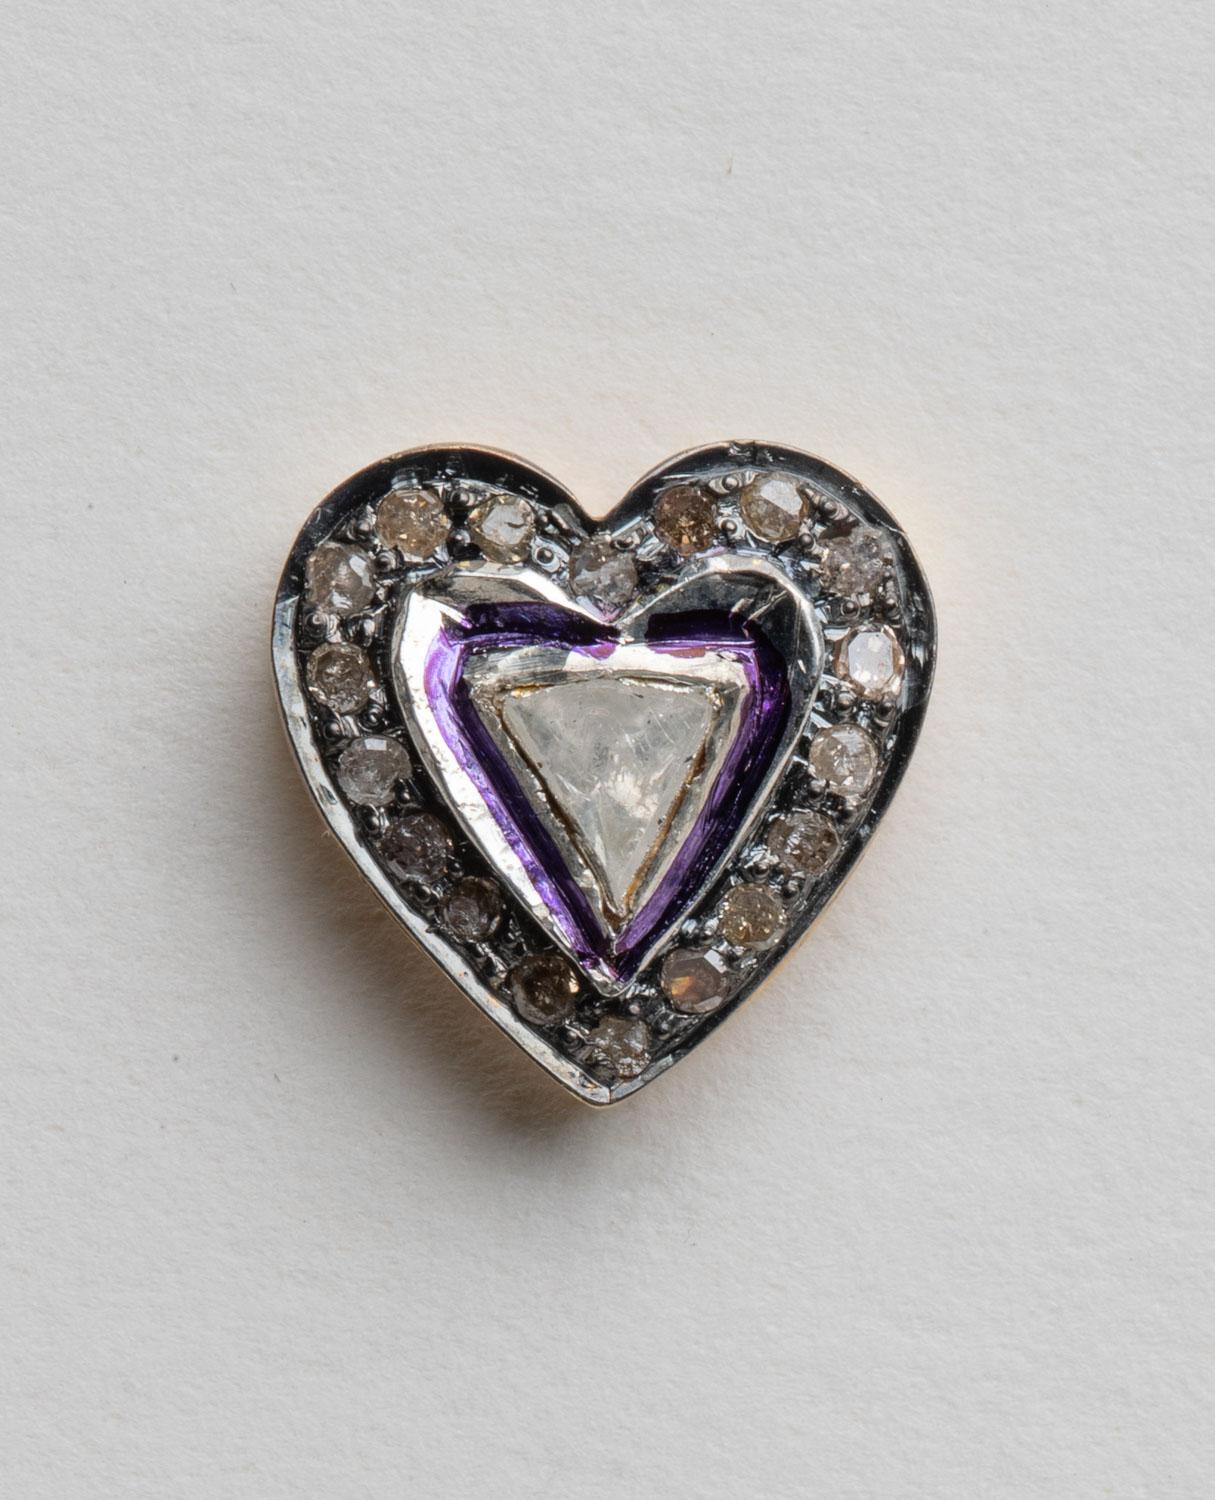 A pair of oxidized sterling earrings in a heart shape with a rosecut diamond in the center with enamel work around it.  Surrounded by round, brilliant cut diamonds in a pave` setting.  18K gold post for pierced ears.  